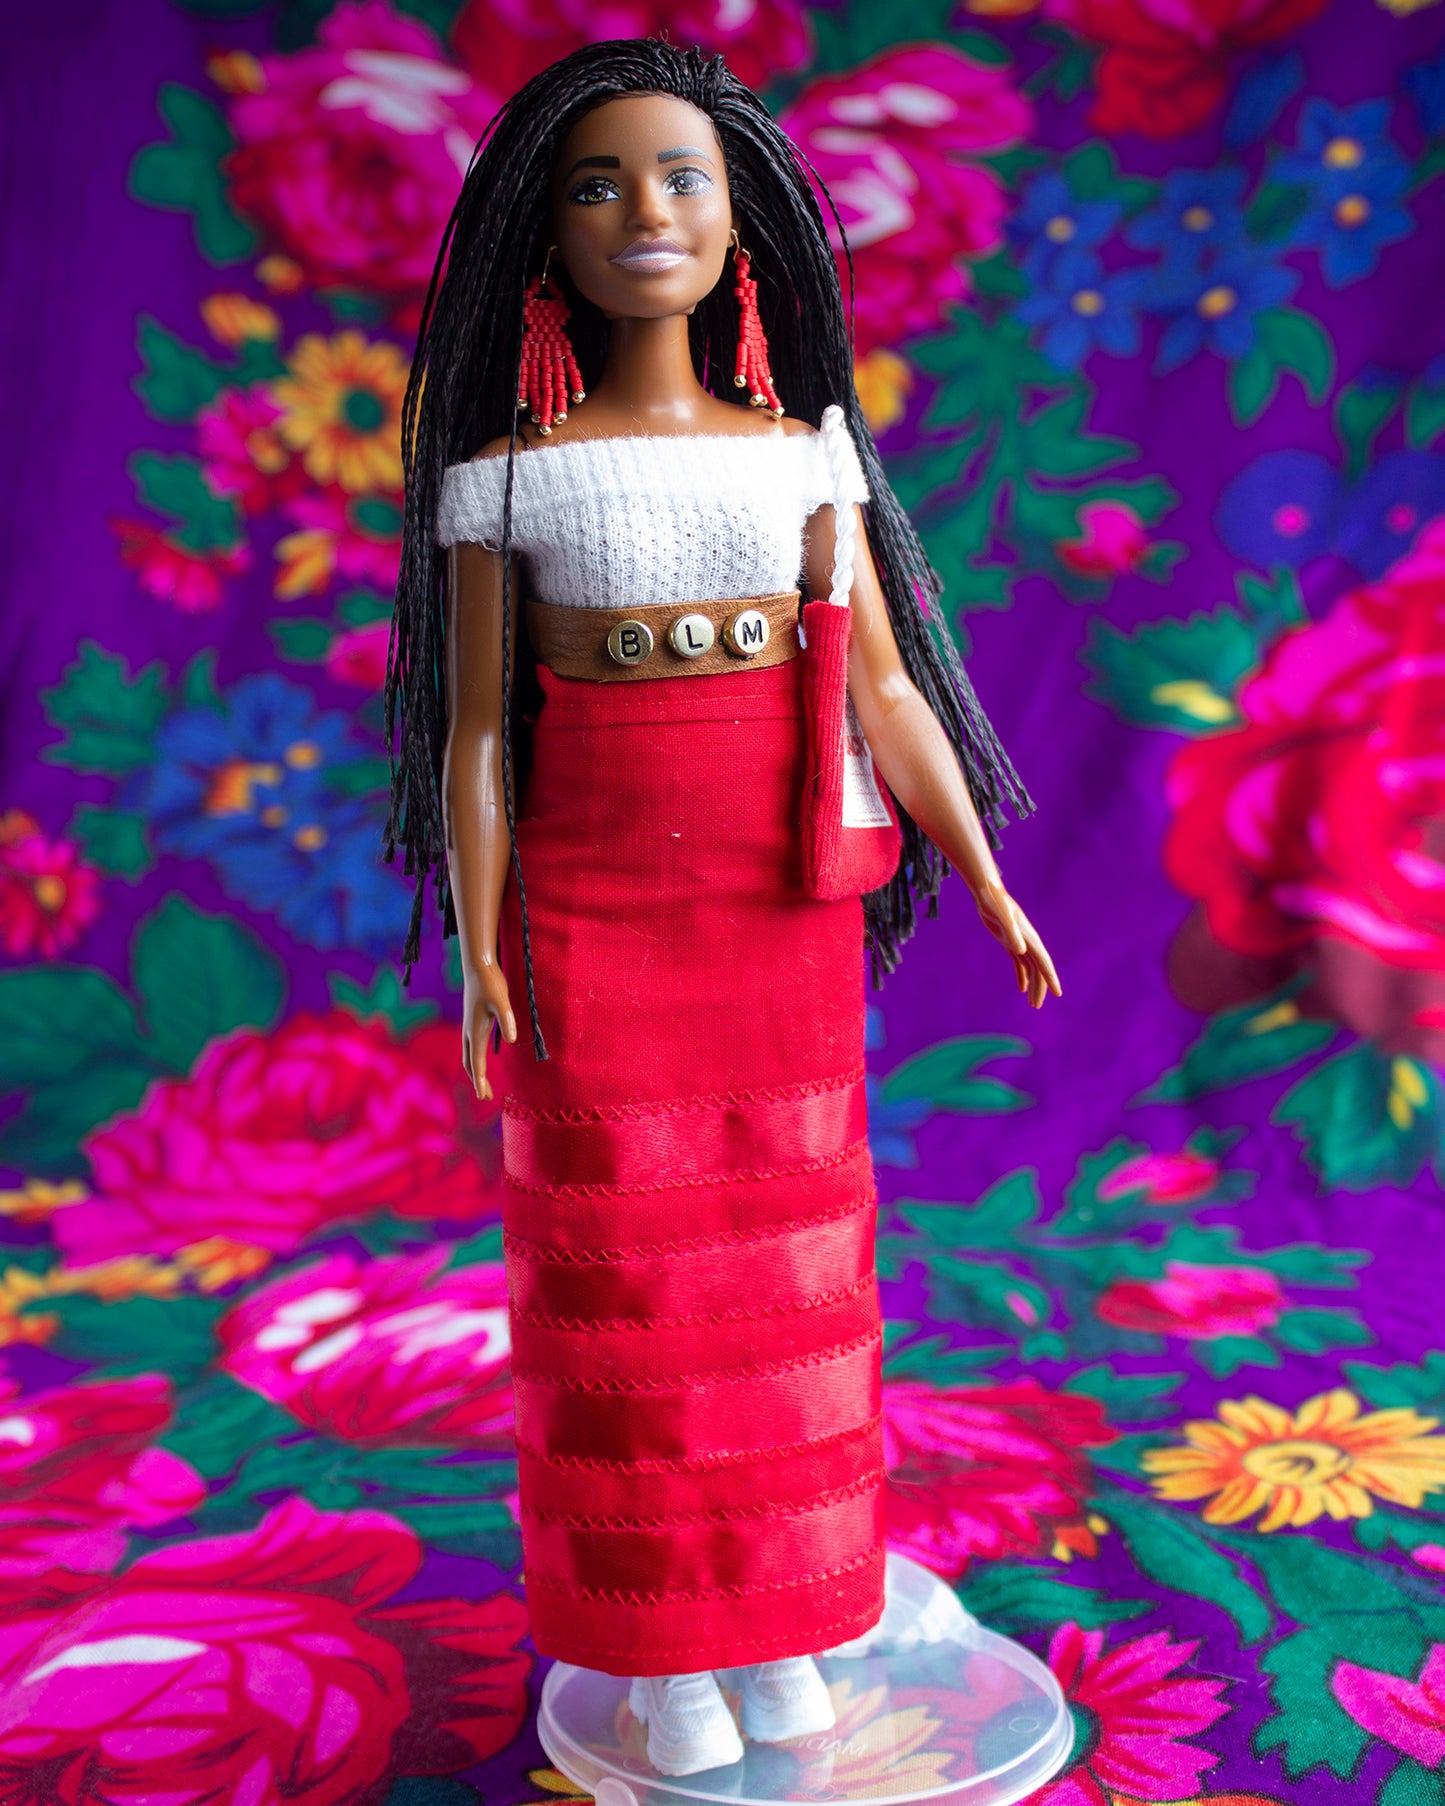 Doll #1 Afro-Indigenous Babe